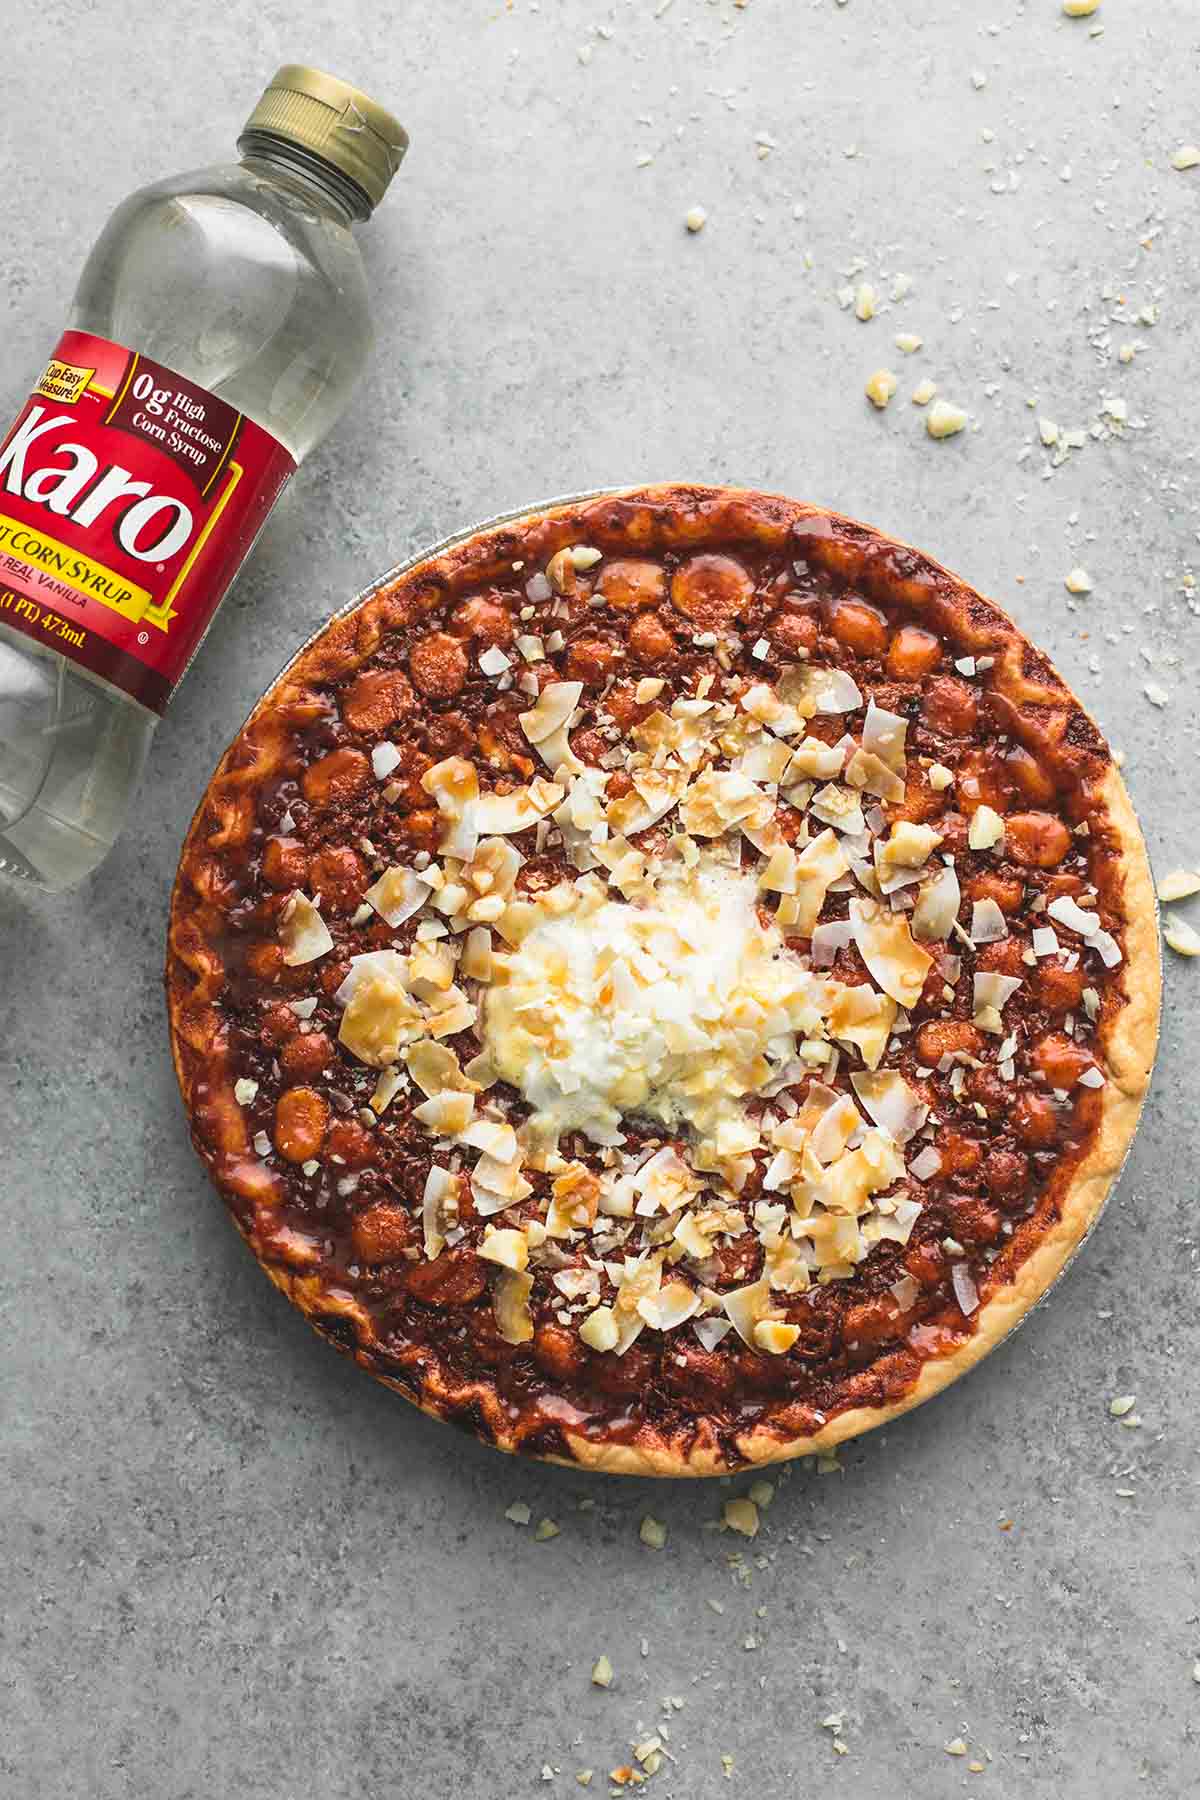 top view of a caramel coconut macadamia nut pie with a bottle of Karo corn syrup on the side.